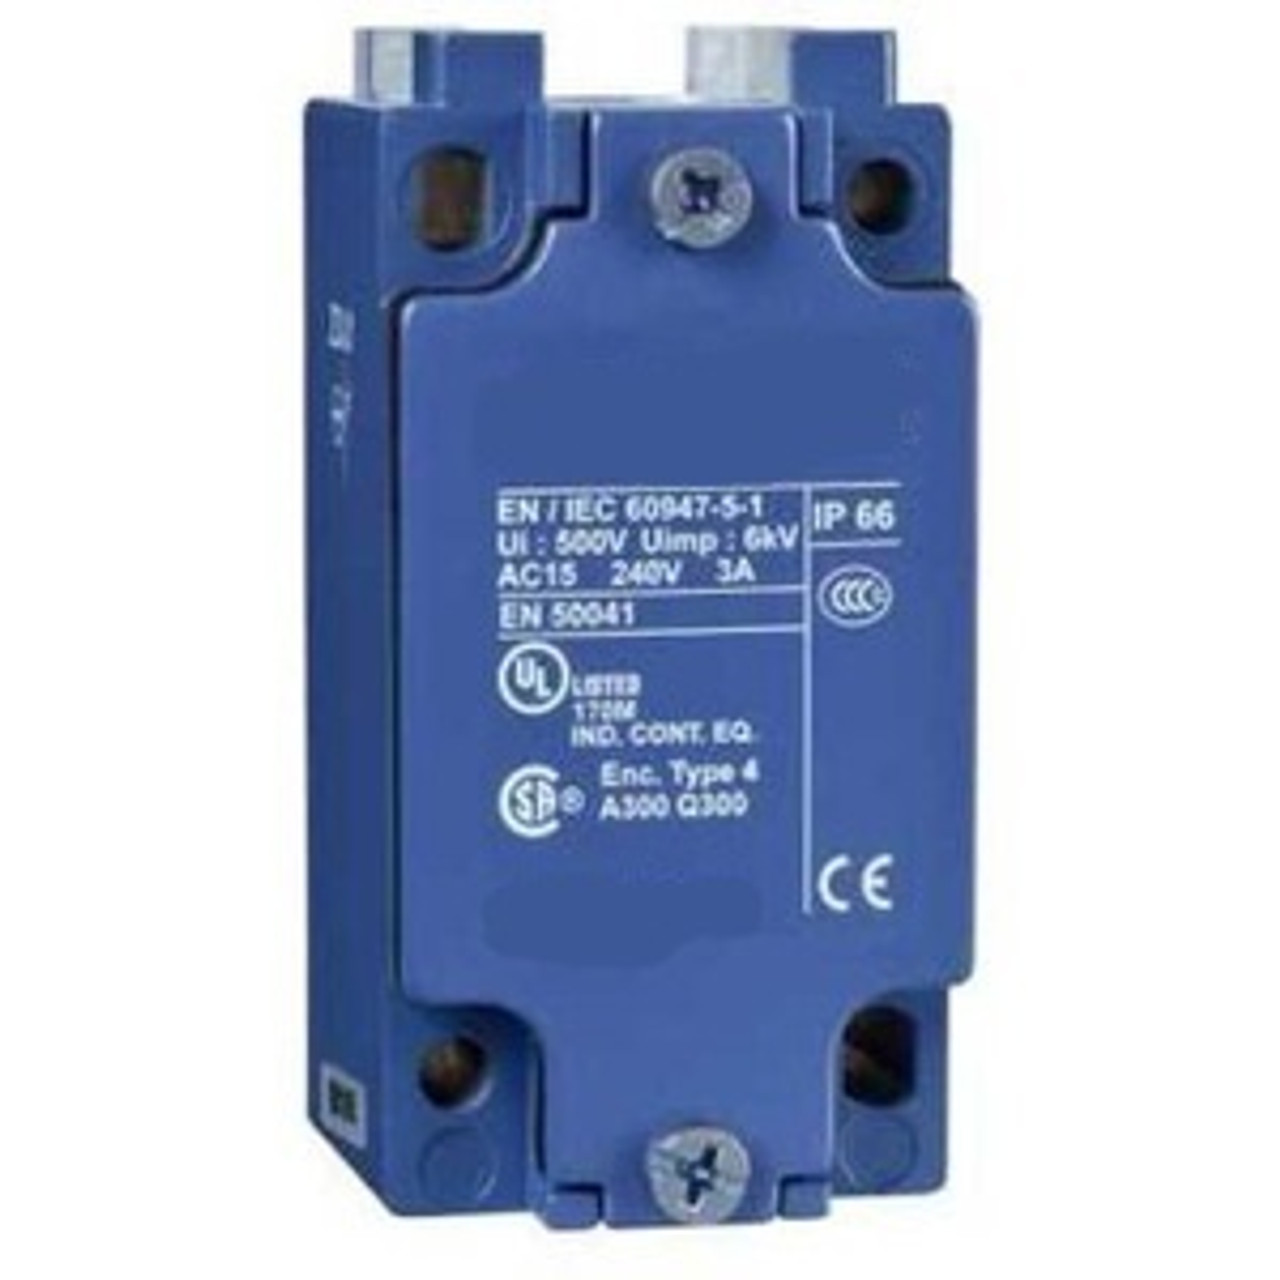 Limit Switch Body and Contacts